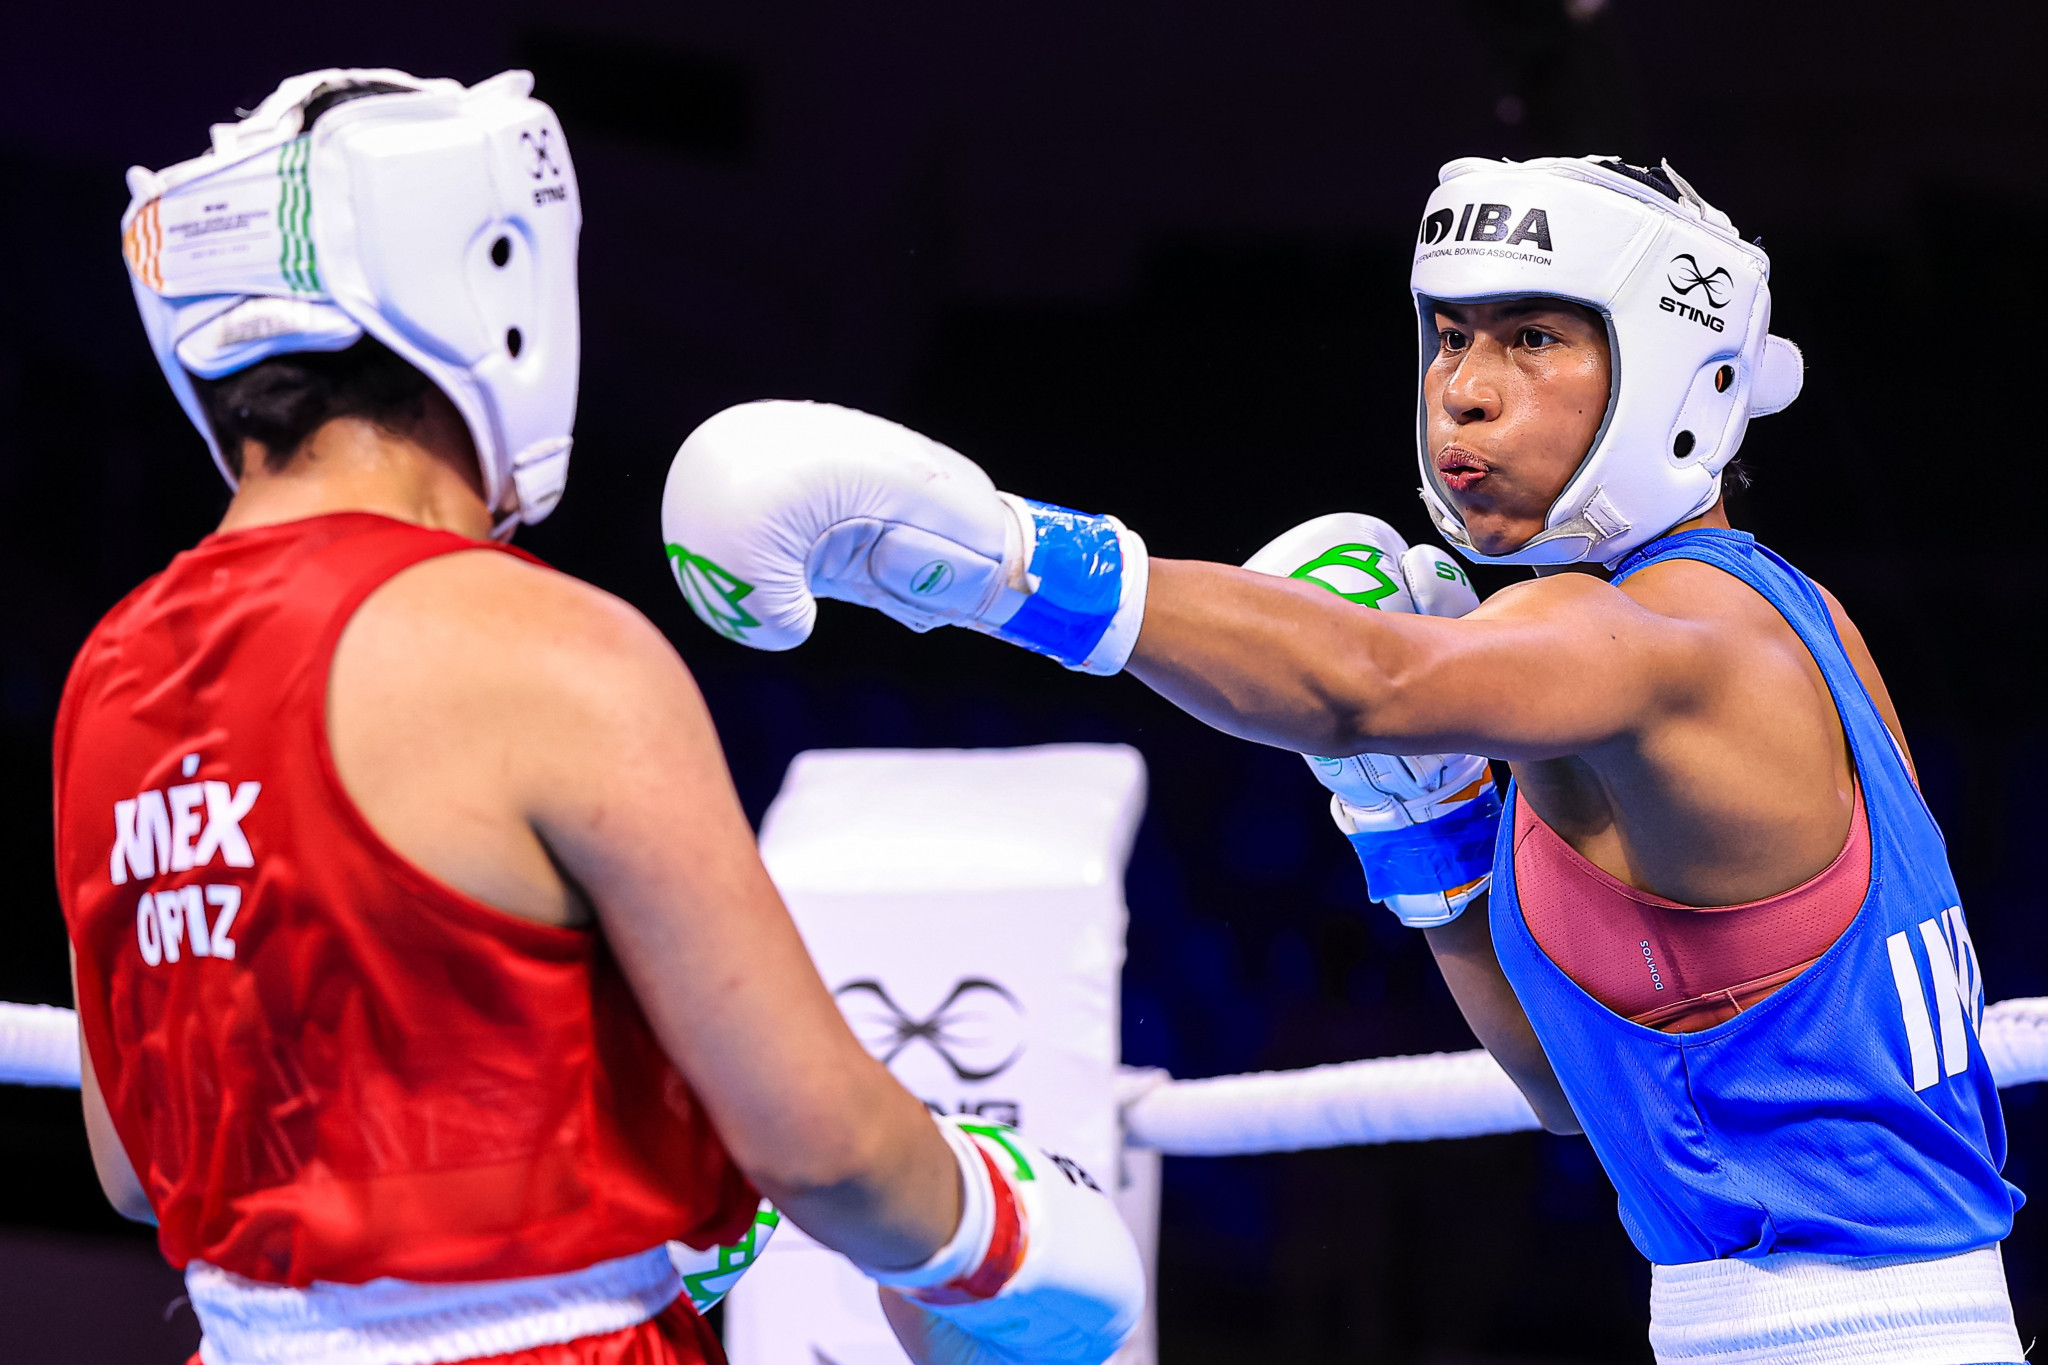 Indian Lovlina Borgohain, right, emerged victorious from her middleweight battle with Venessa Ortiz of Mexico ©IBA